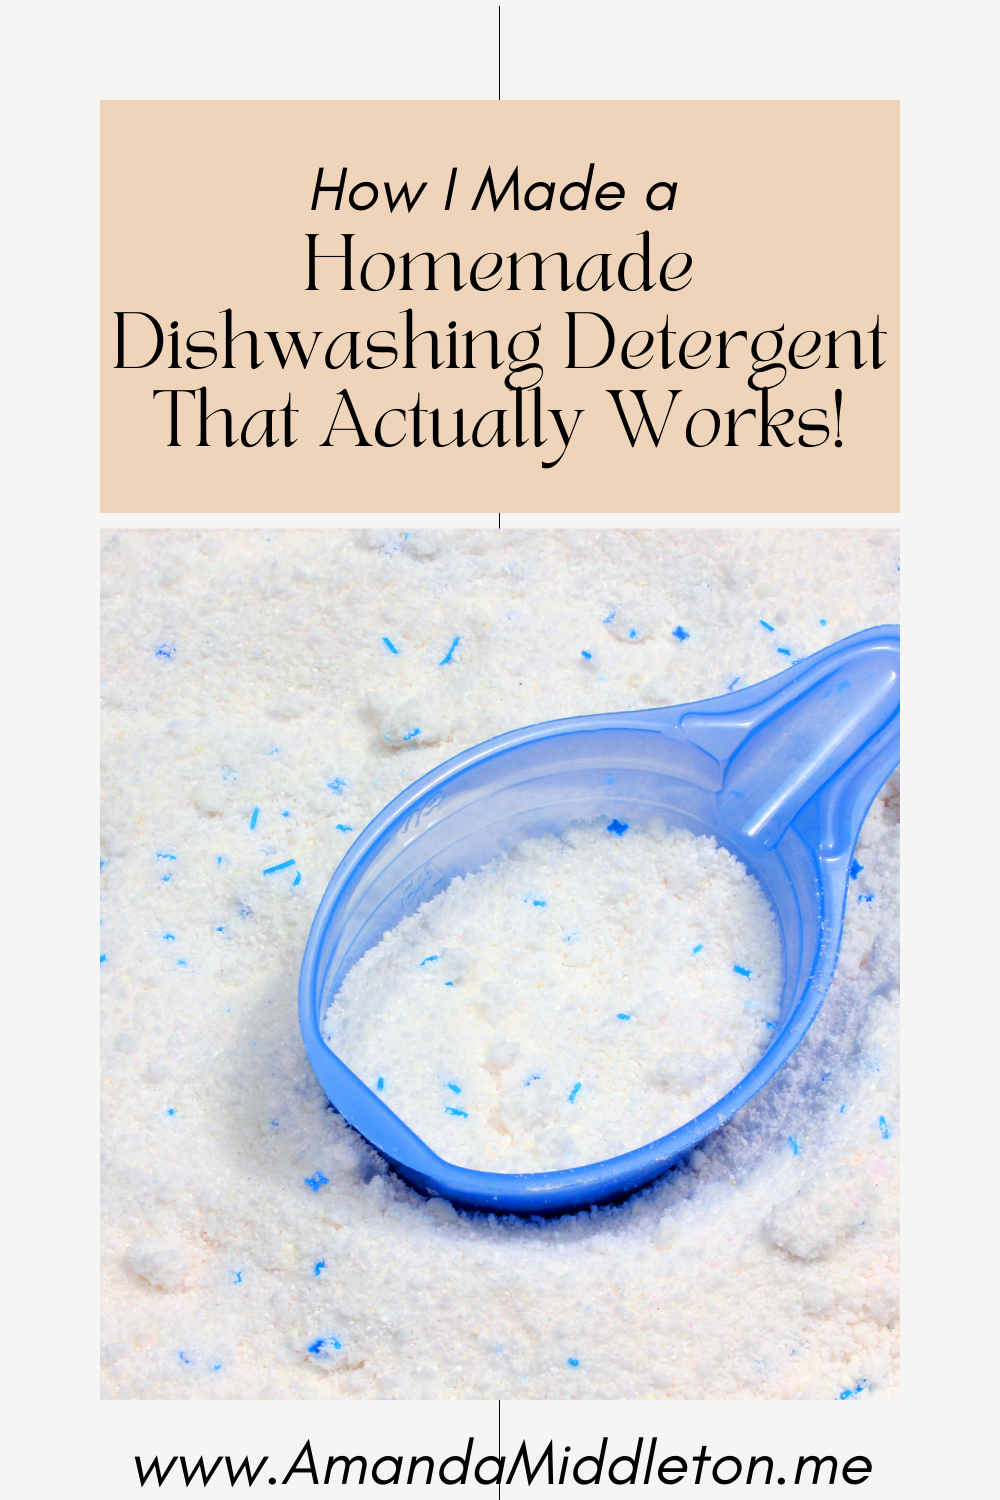 How I Made a Homemade Dishwashing Detergent That Actually Works!